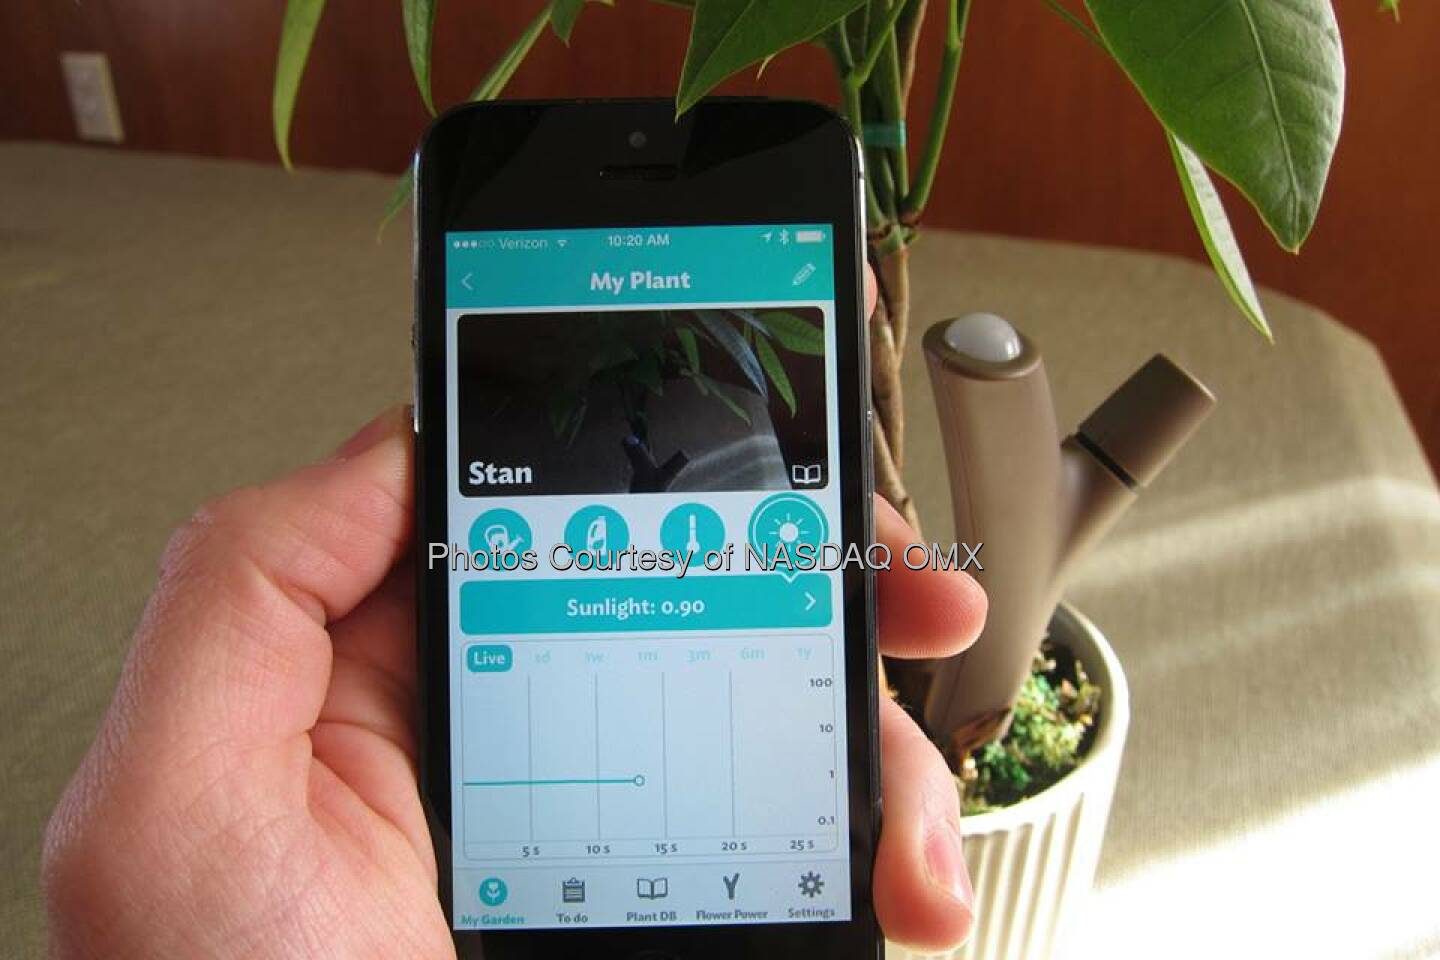 Don't have a green thumb? No worries, @Parrot has created a device that monitors light levels, water and soil nutrients, helping you keep your plants alive and well. 

http://bit.ly/1mwyE1J  Source: http://facebook.com/NASDAQ